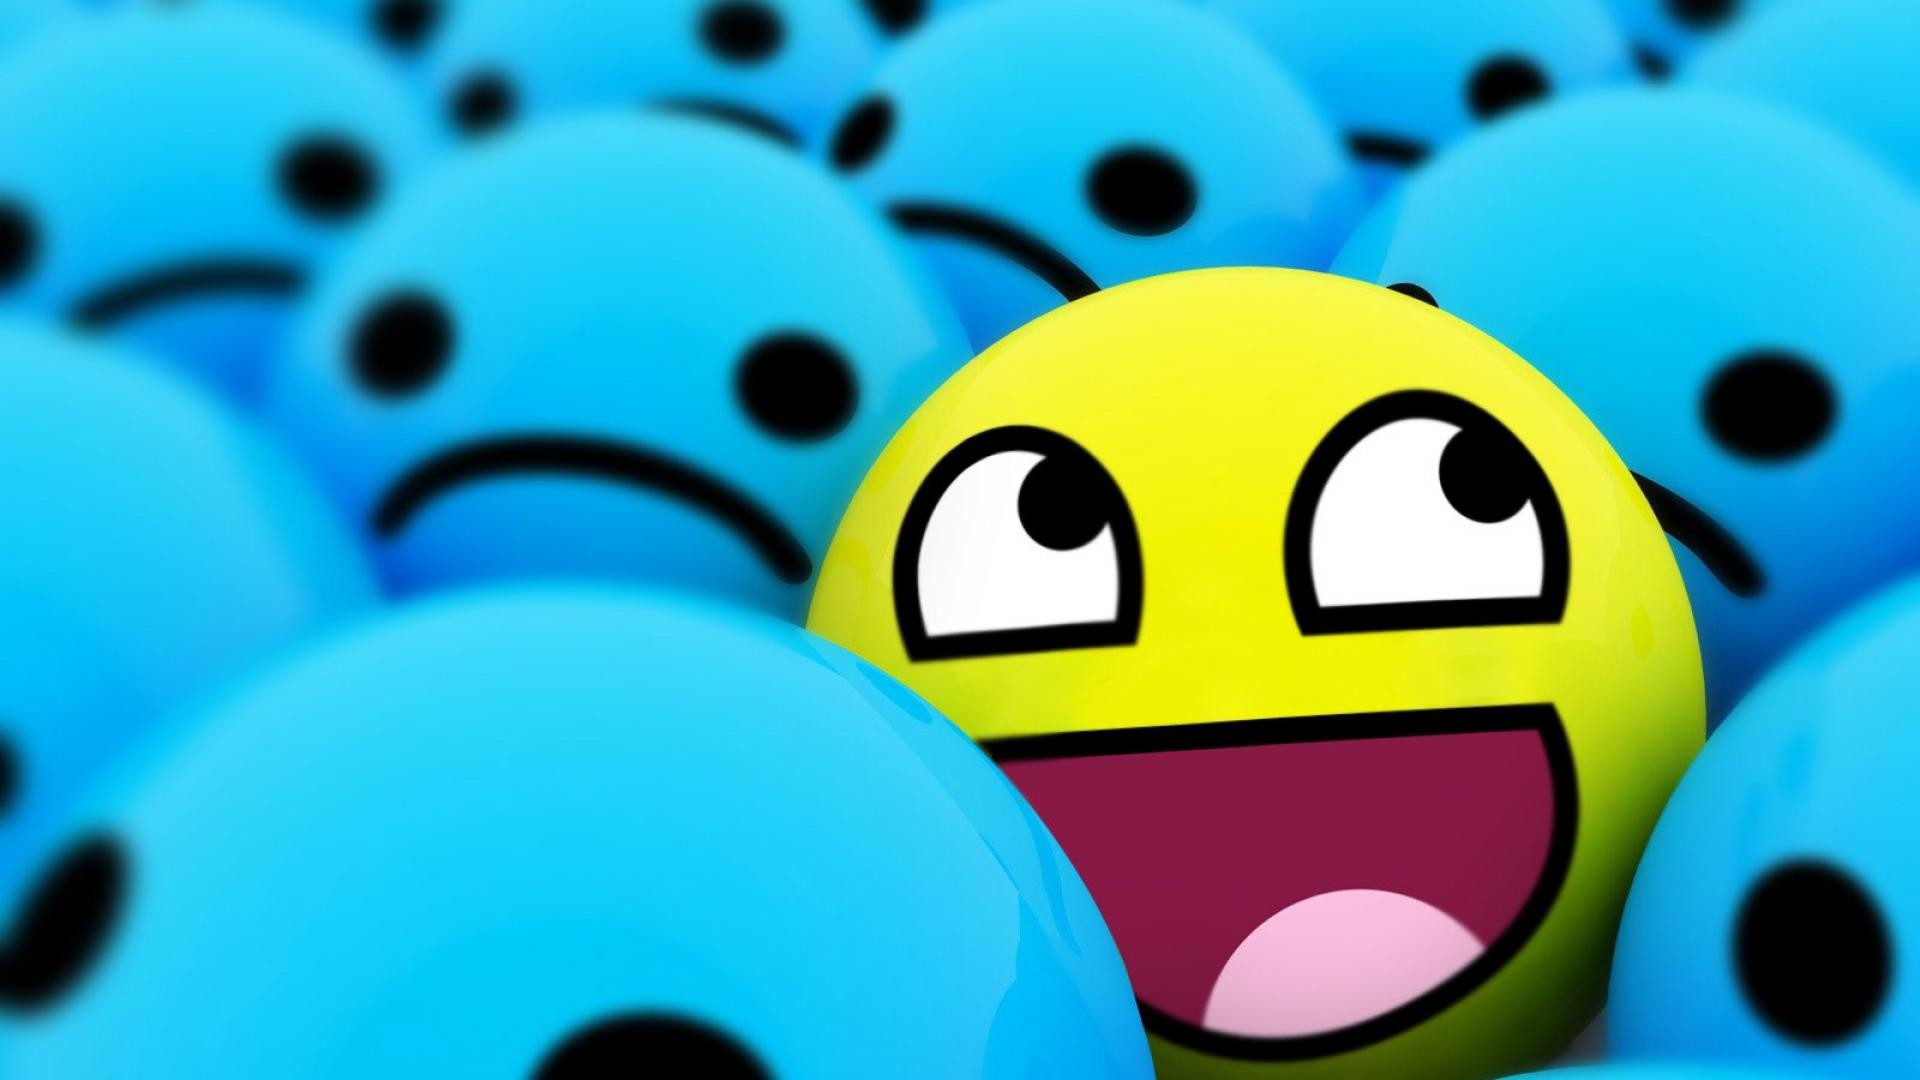 Awesome Smiley Face Wallpaper.